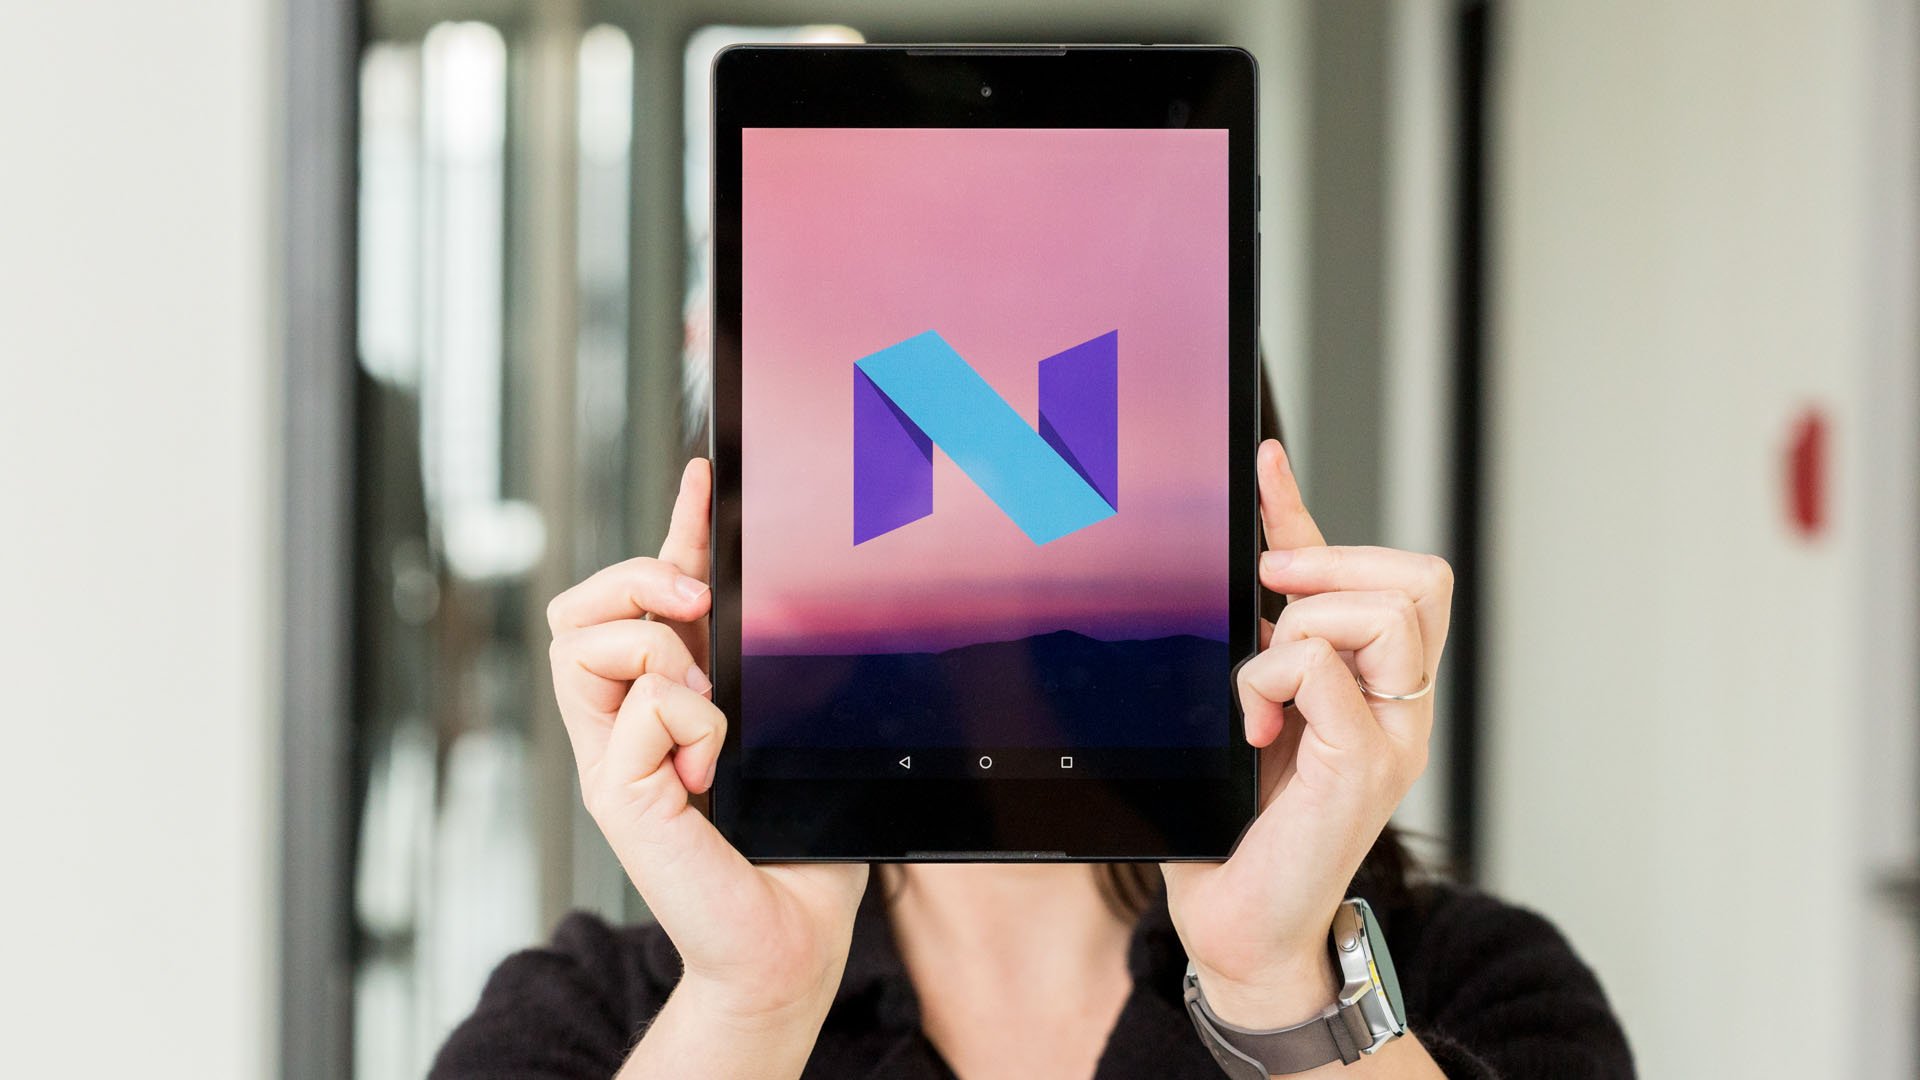 Android Nougat is still not what we expected